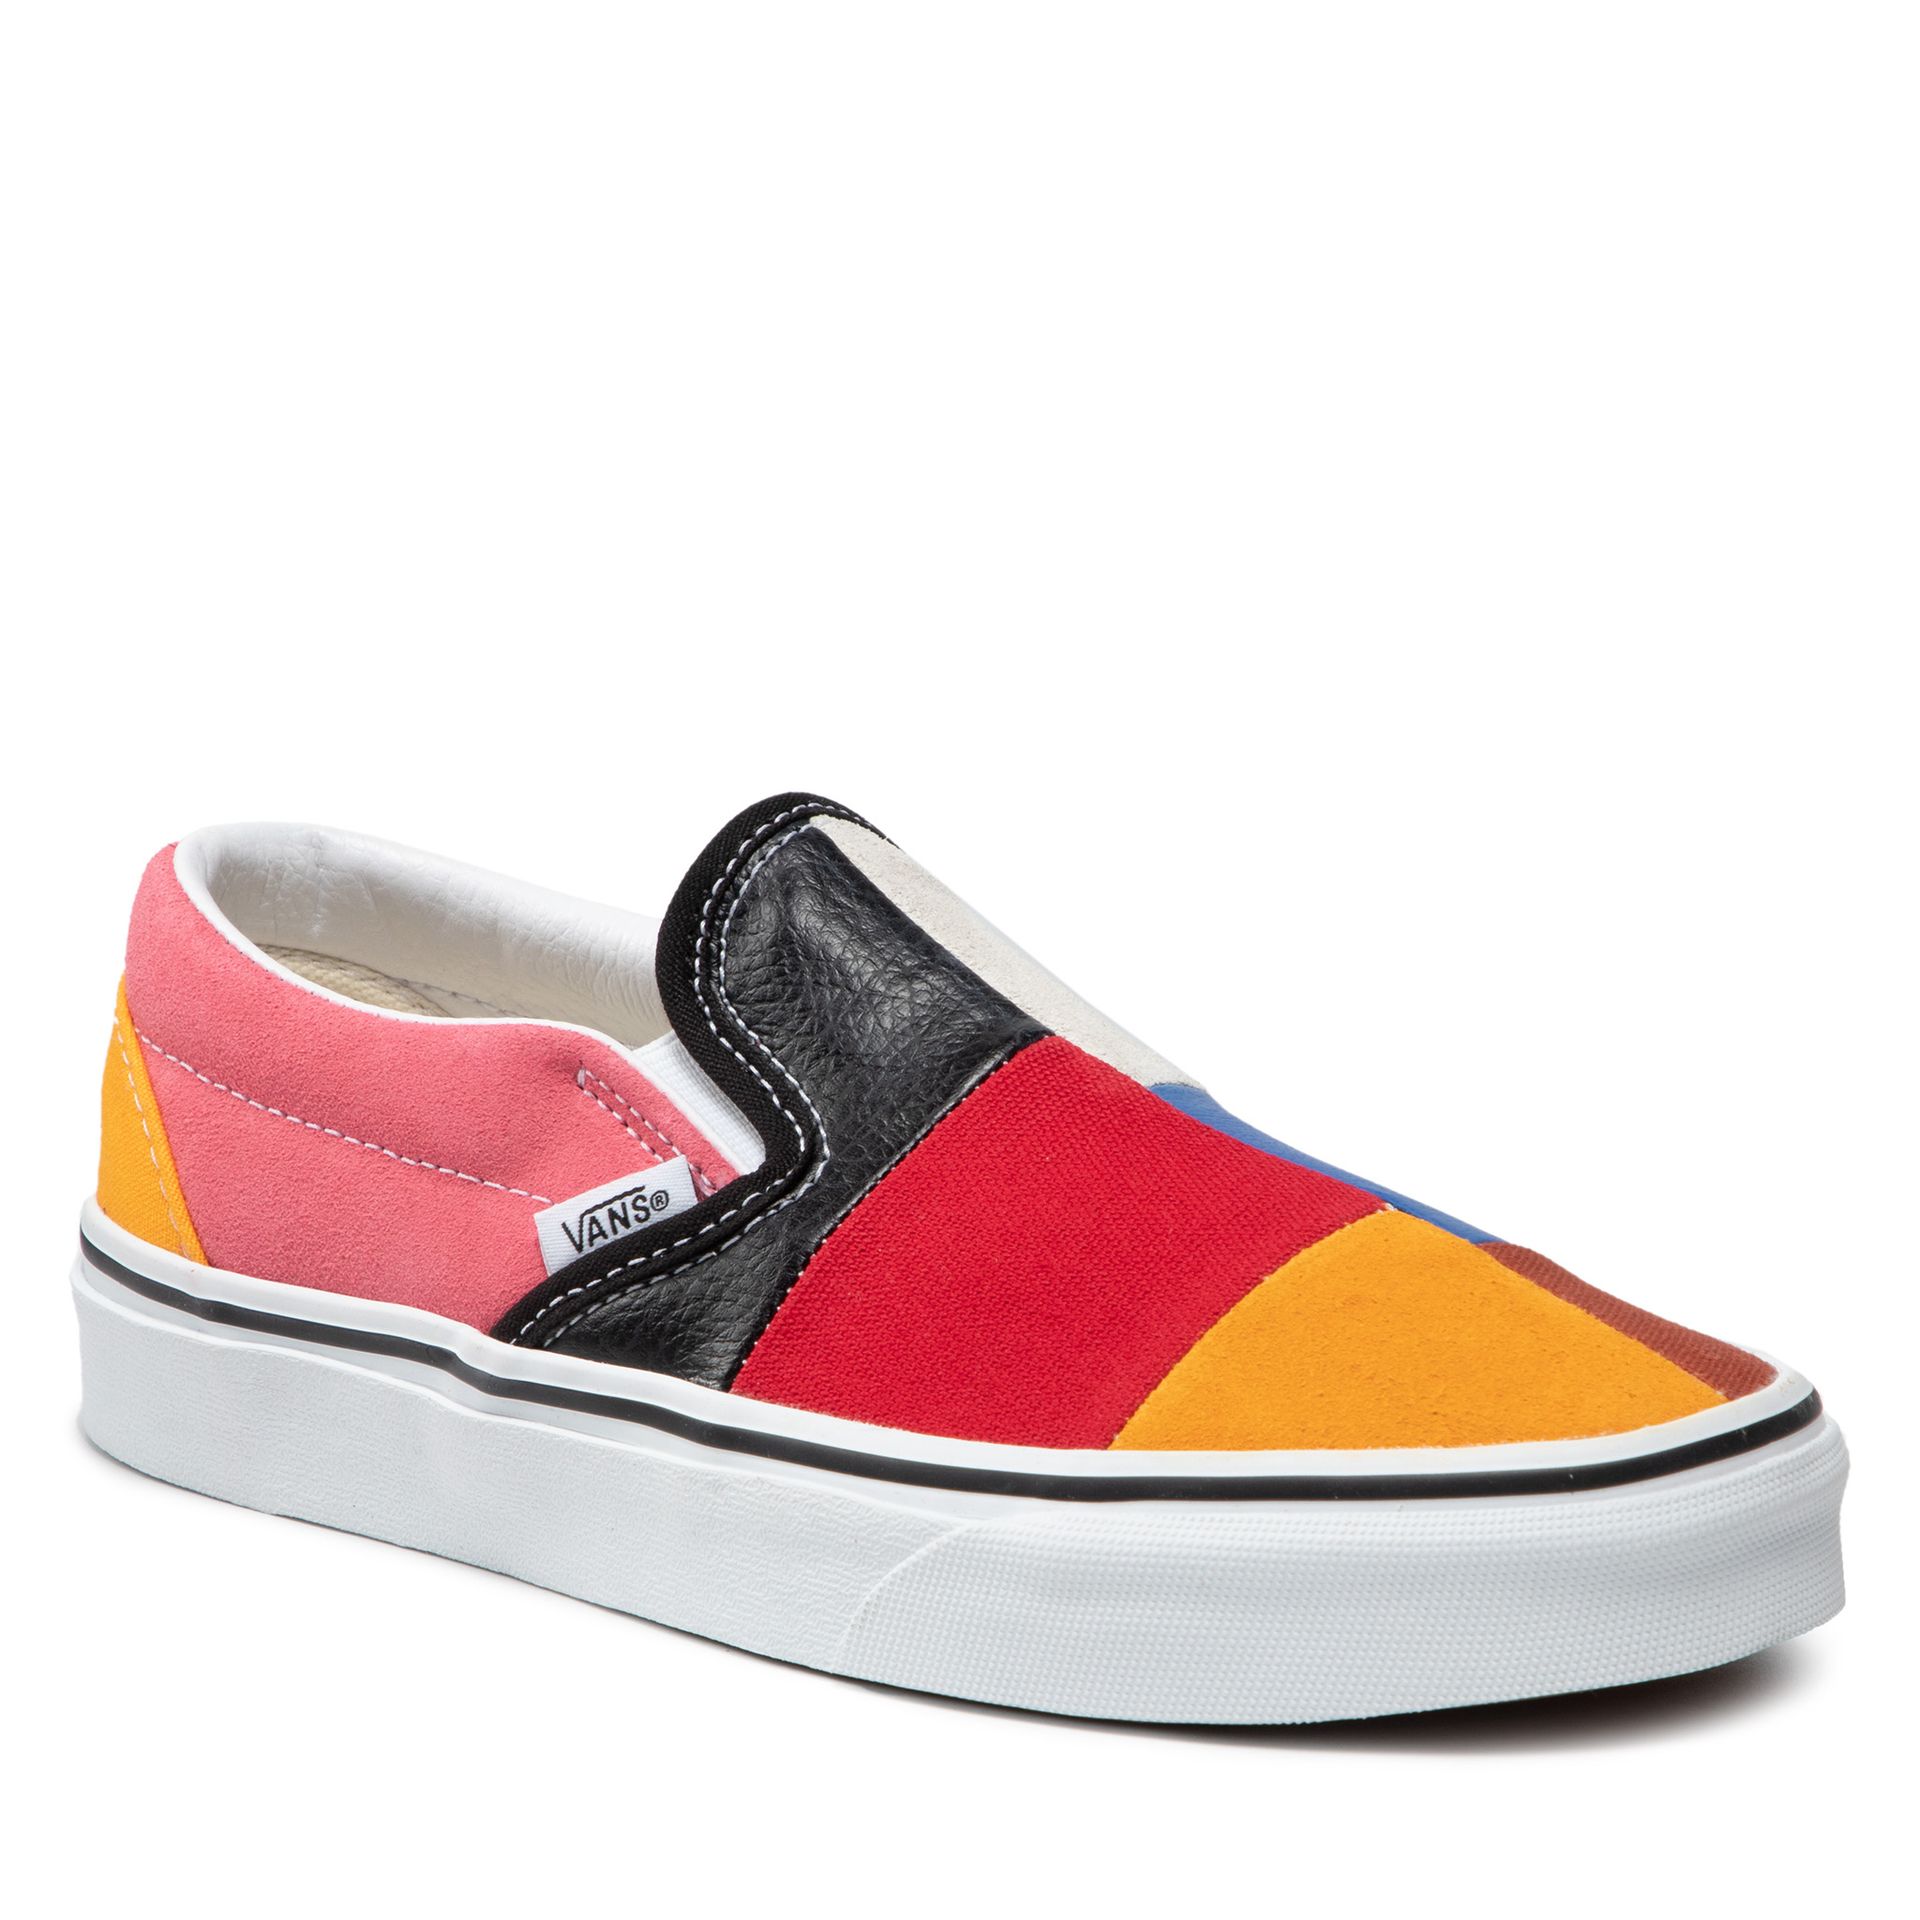 Vans Tenisówki Classic Slip-On VN0A38F7VMF1 (Patchwork) Multi/Ture Wh